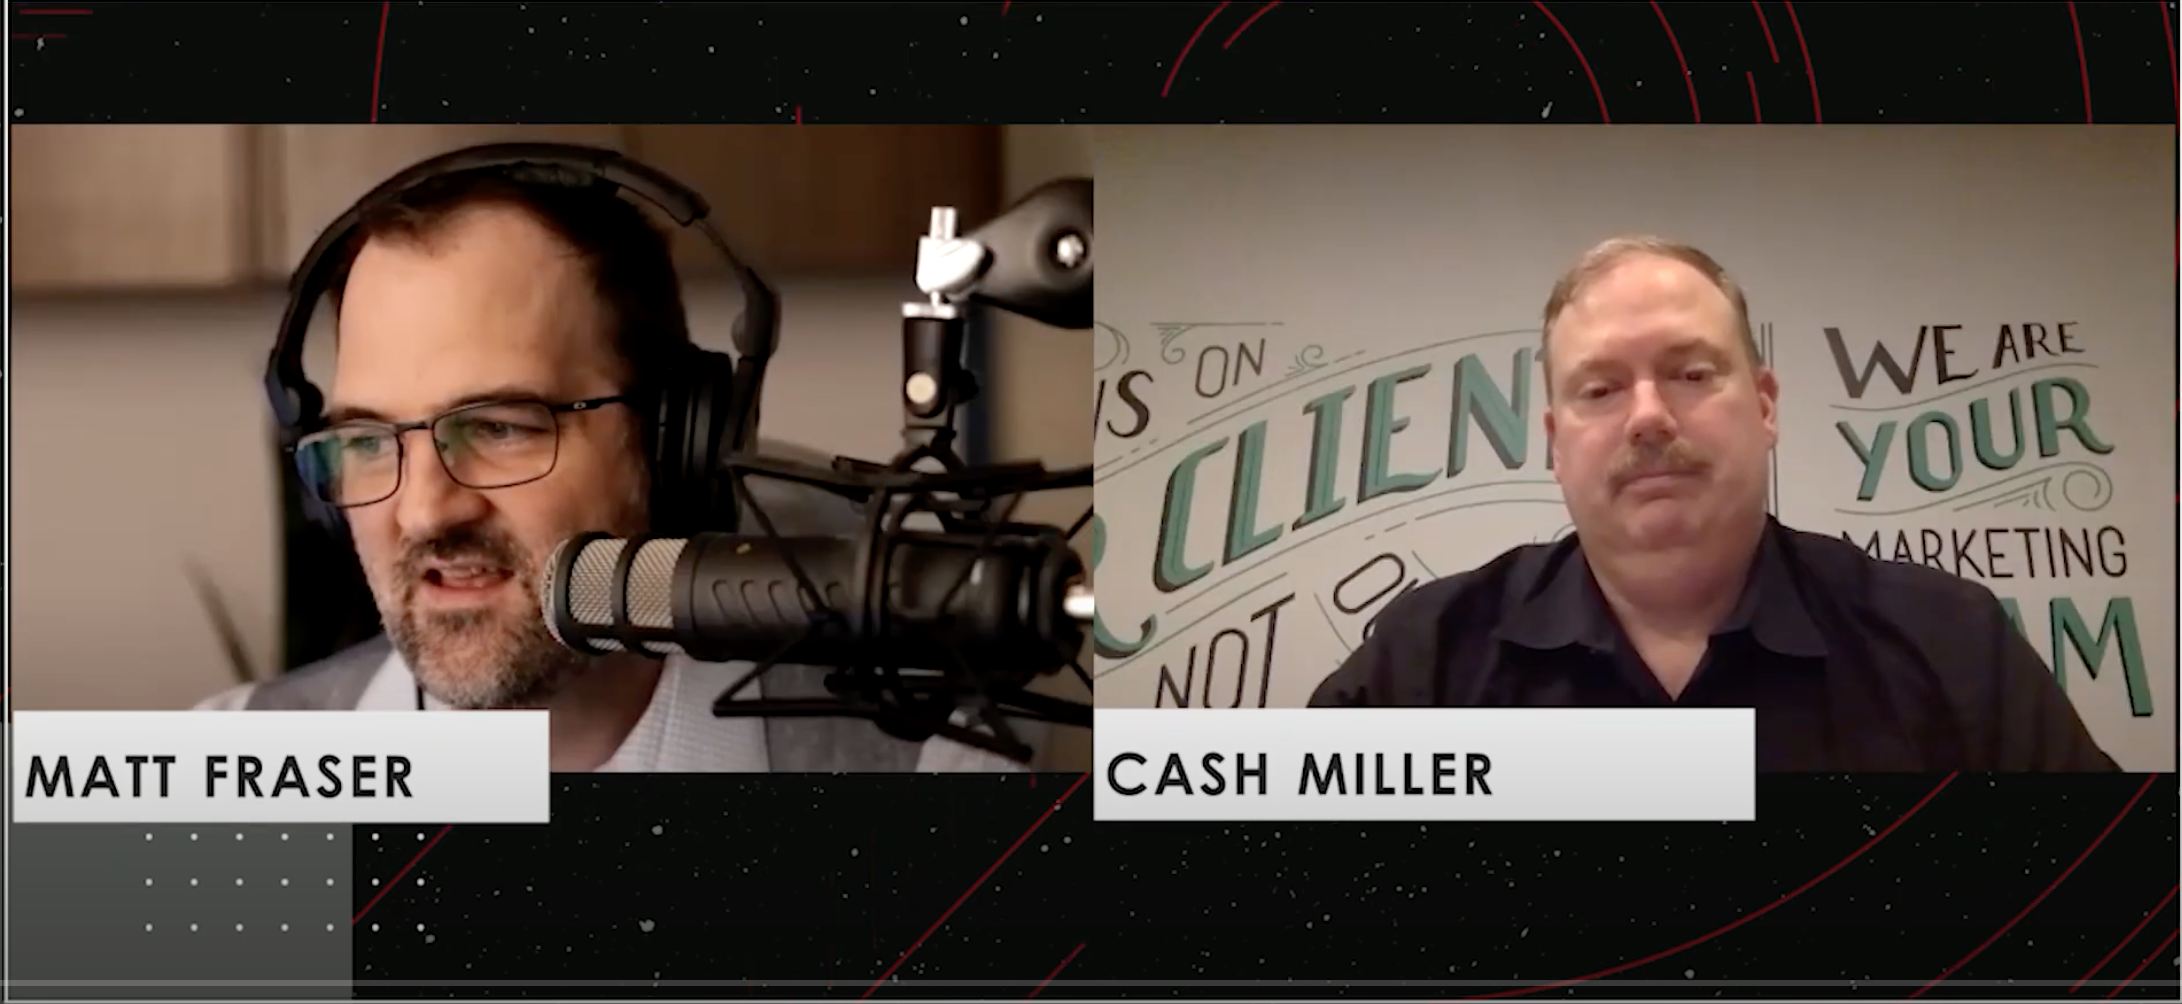 Cash Miller, CEO on the Podcast E-Coffee with Experts and Host Matt Fraser